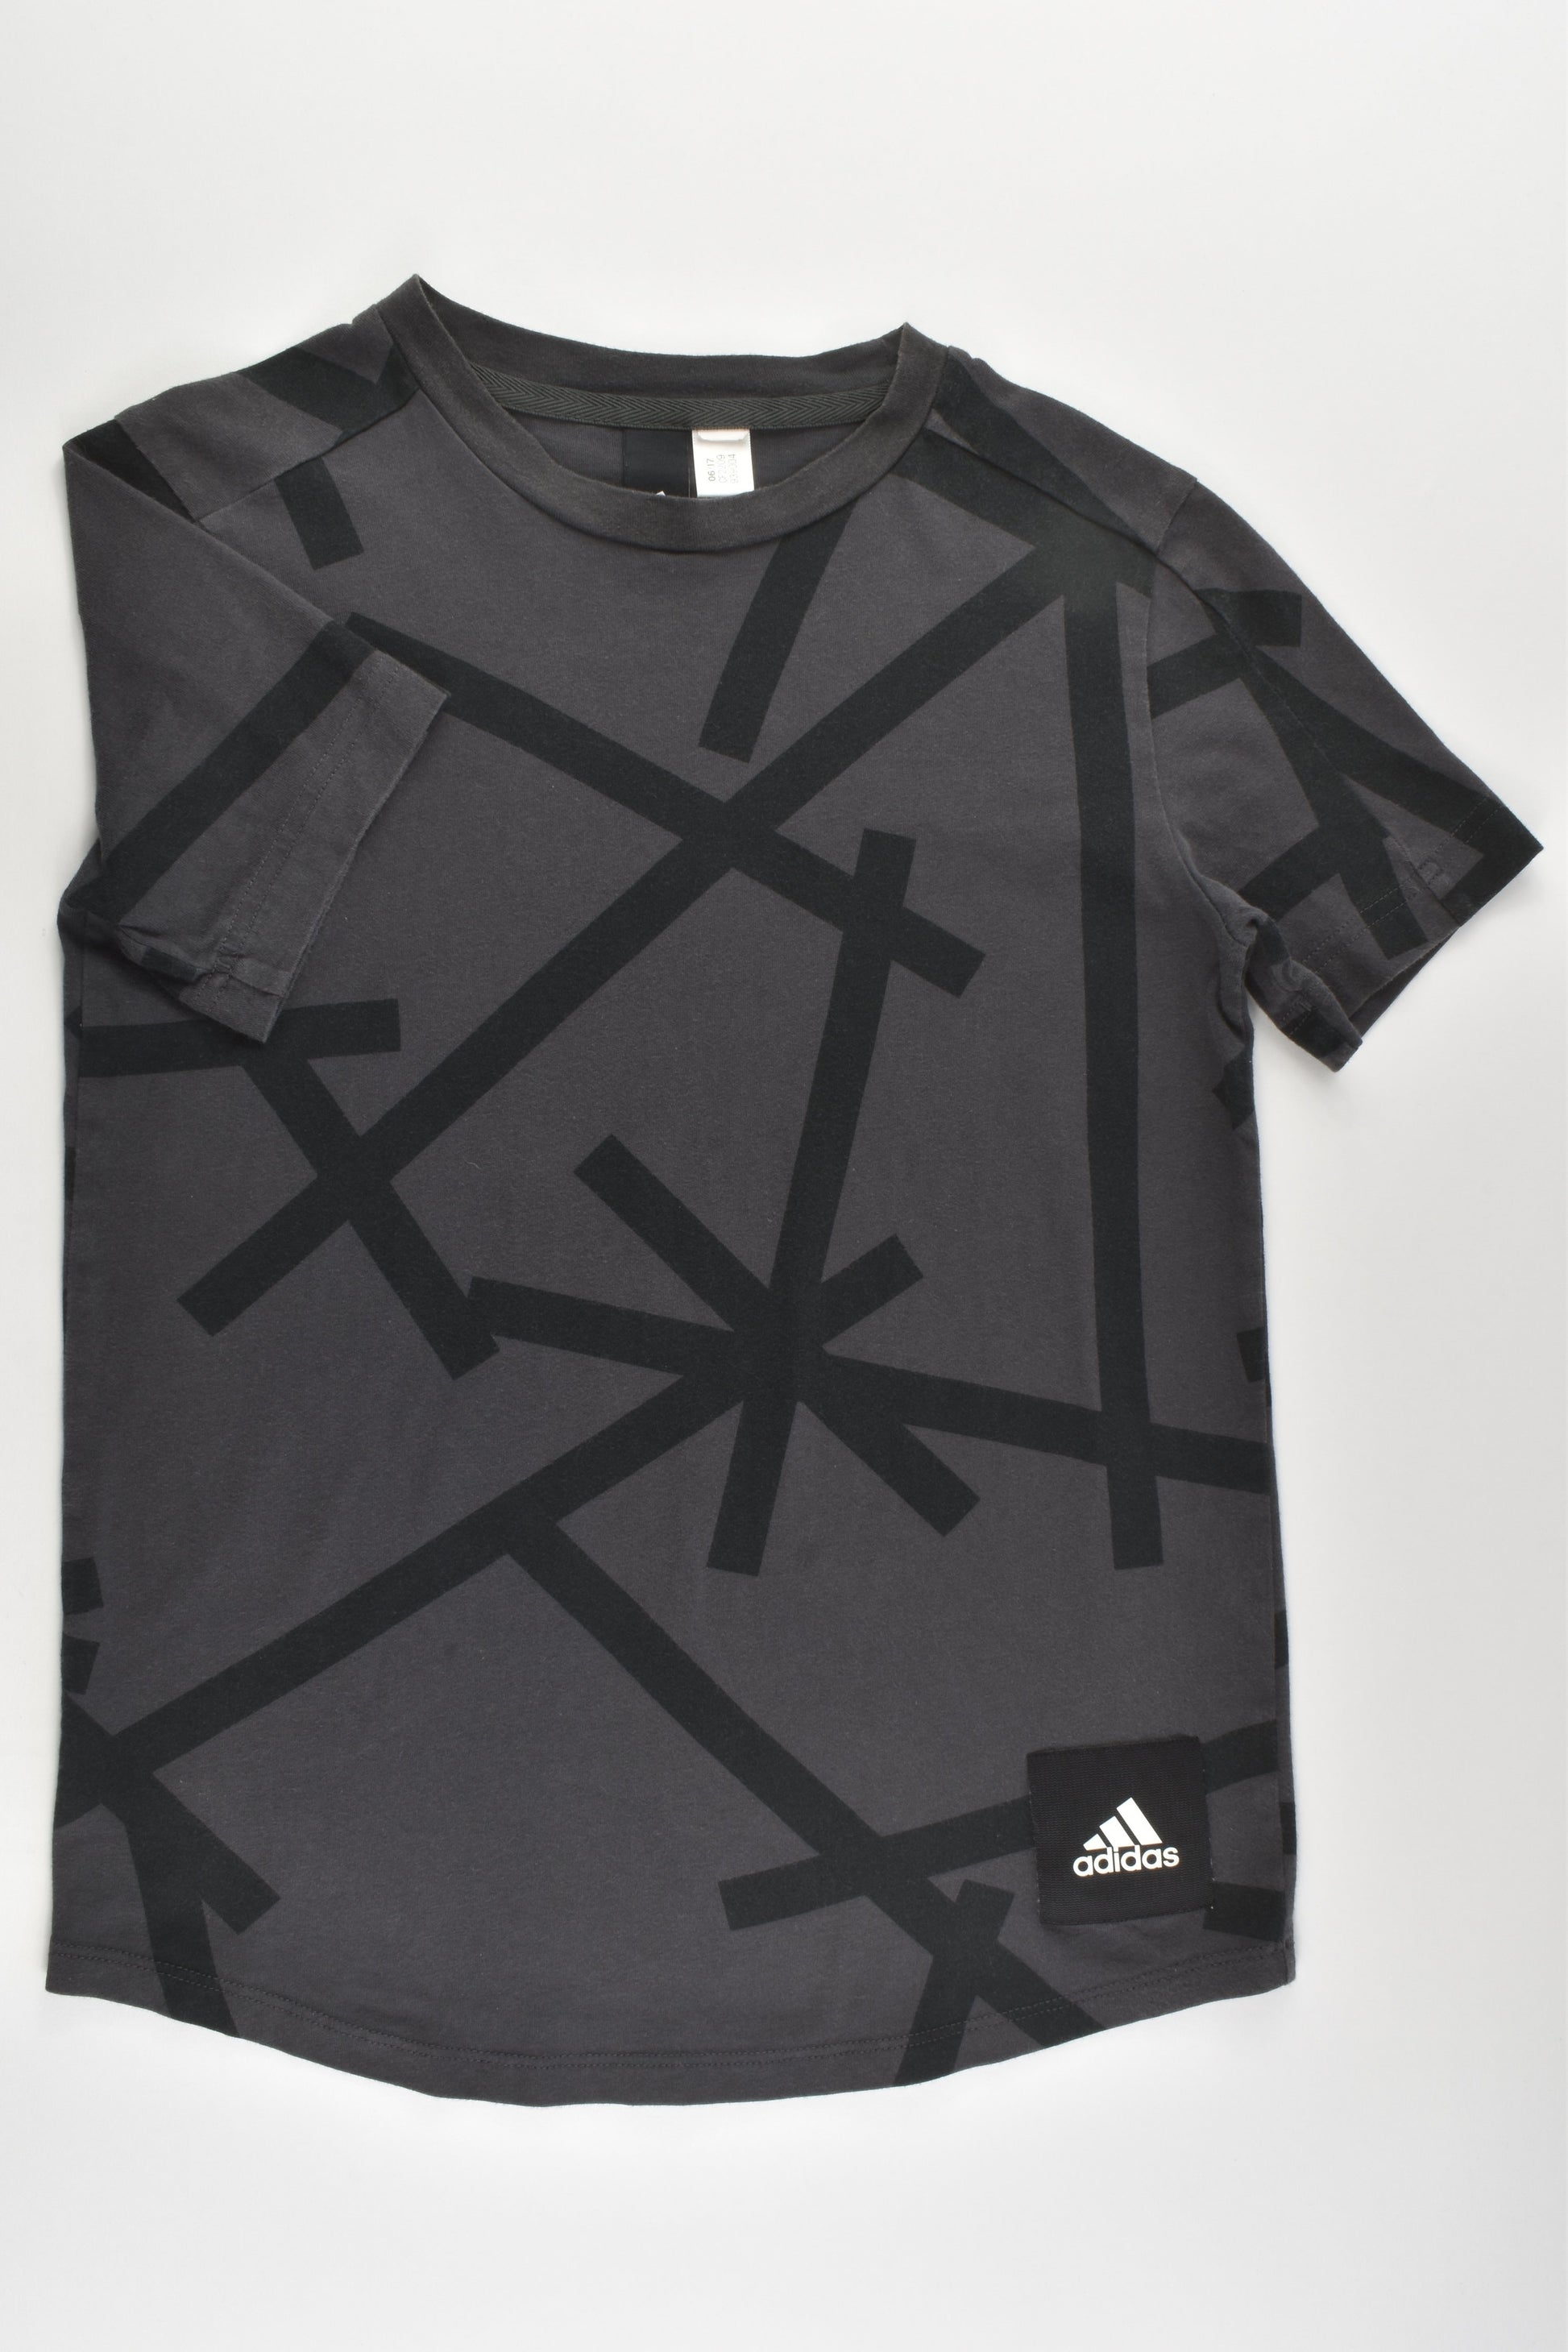 Adidas Size approx 9-10 T-shirt